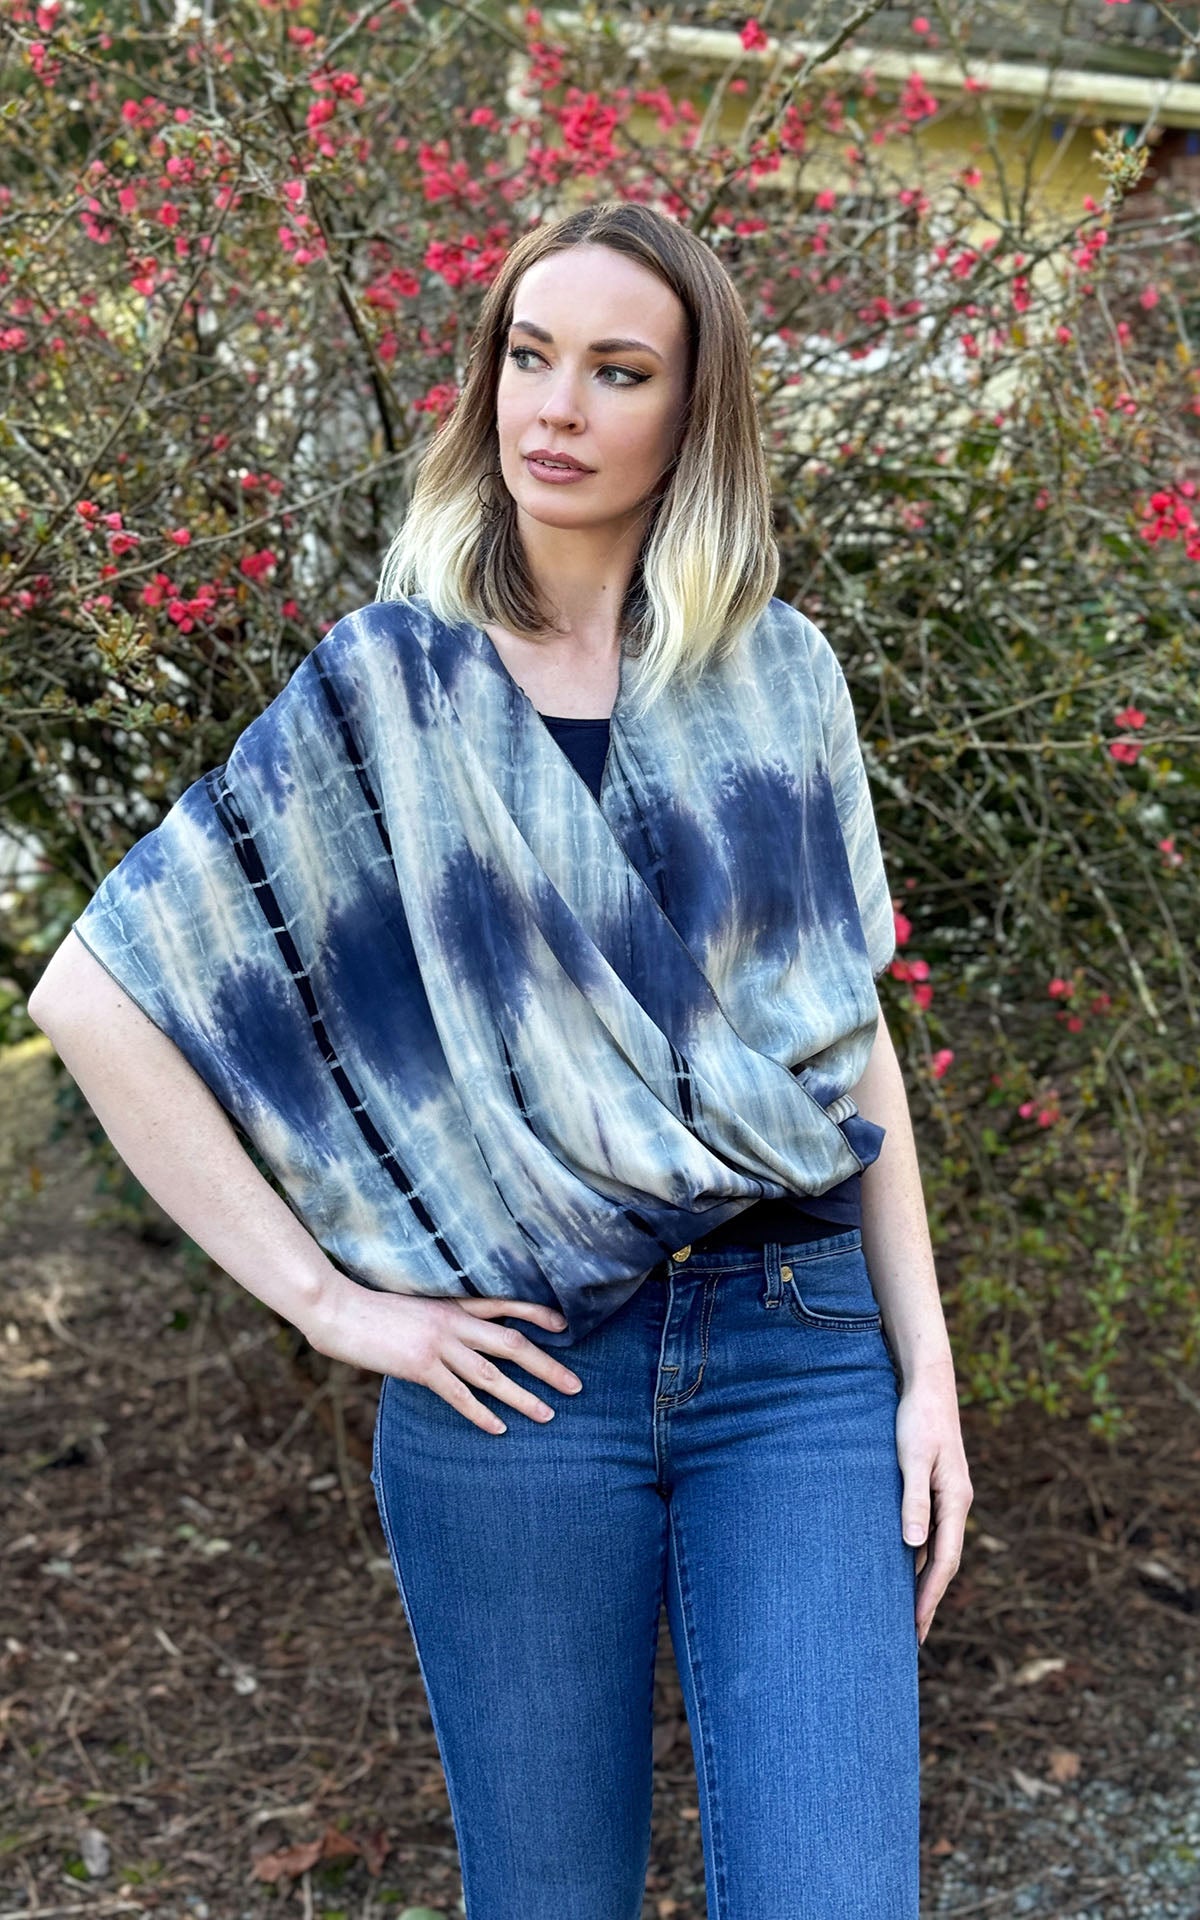 Tea Time Crossover Top in Blue from the Leigh Young Collection handmade in Seattle, WA USA